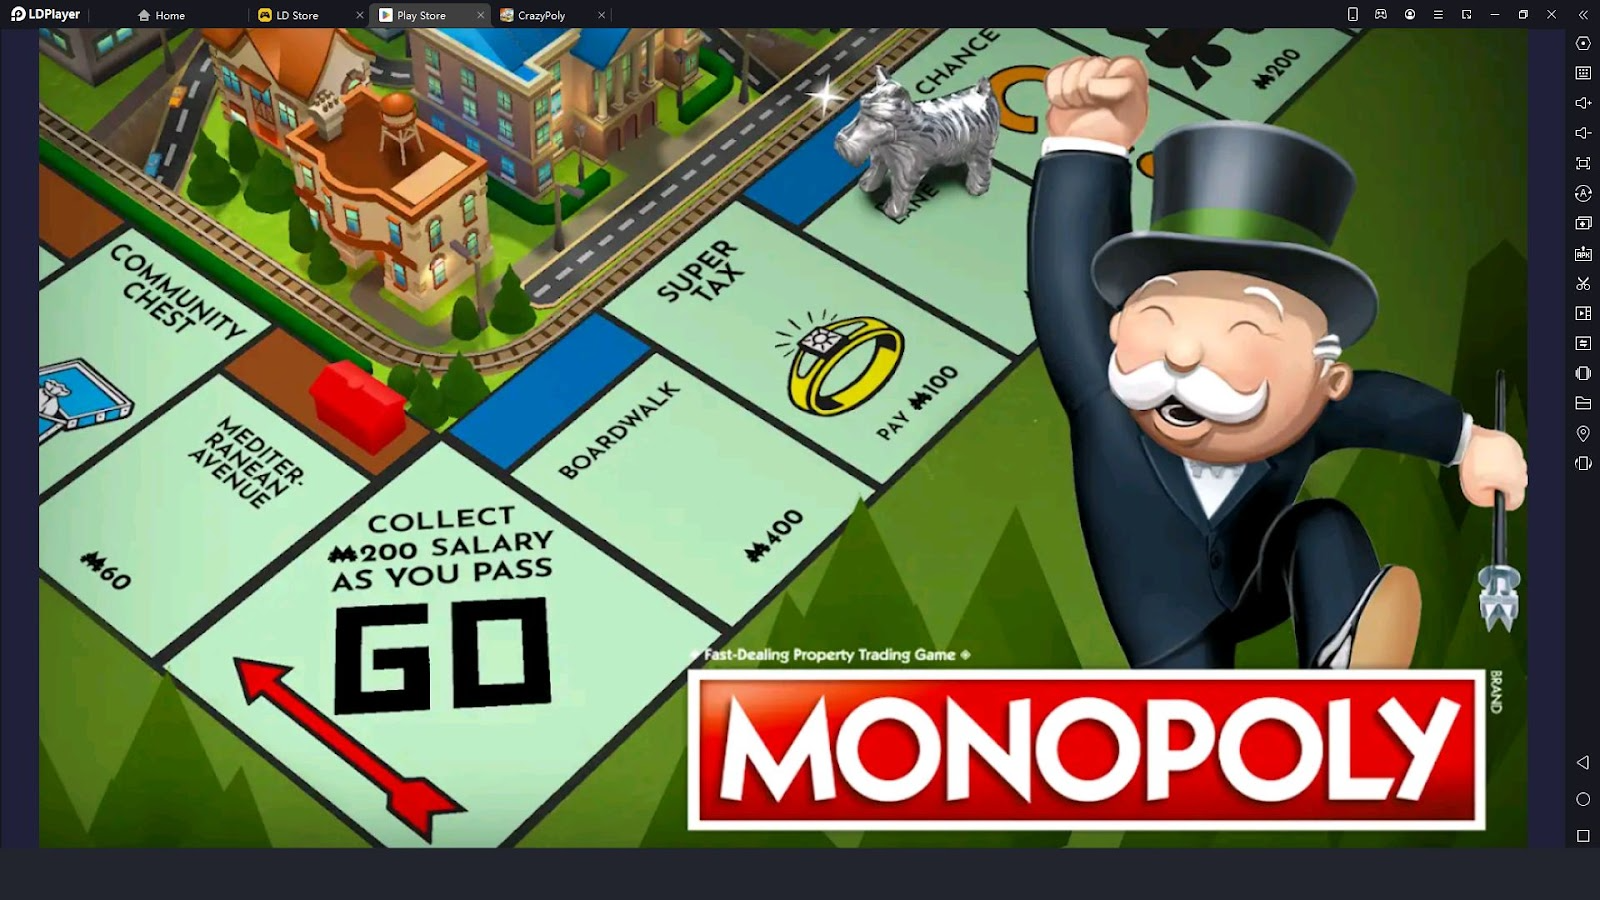 MONOPOLY – Classic Board Game